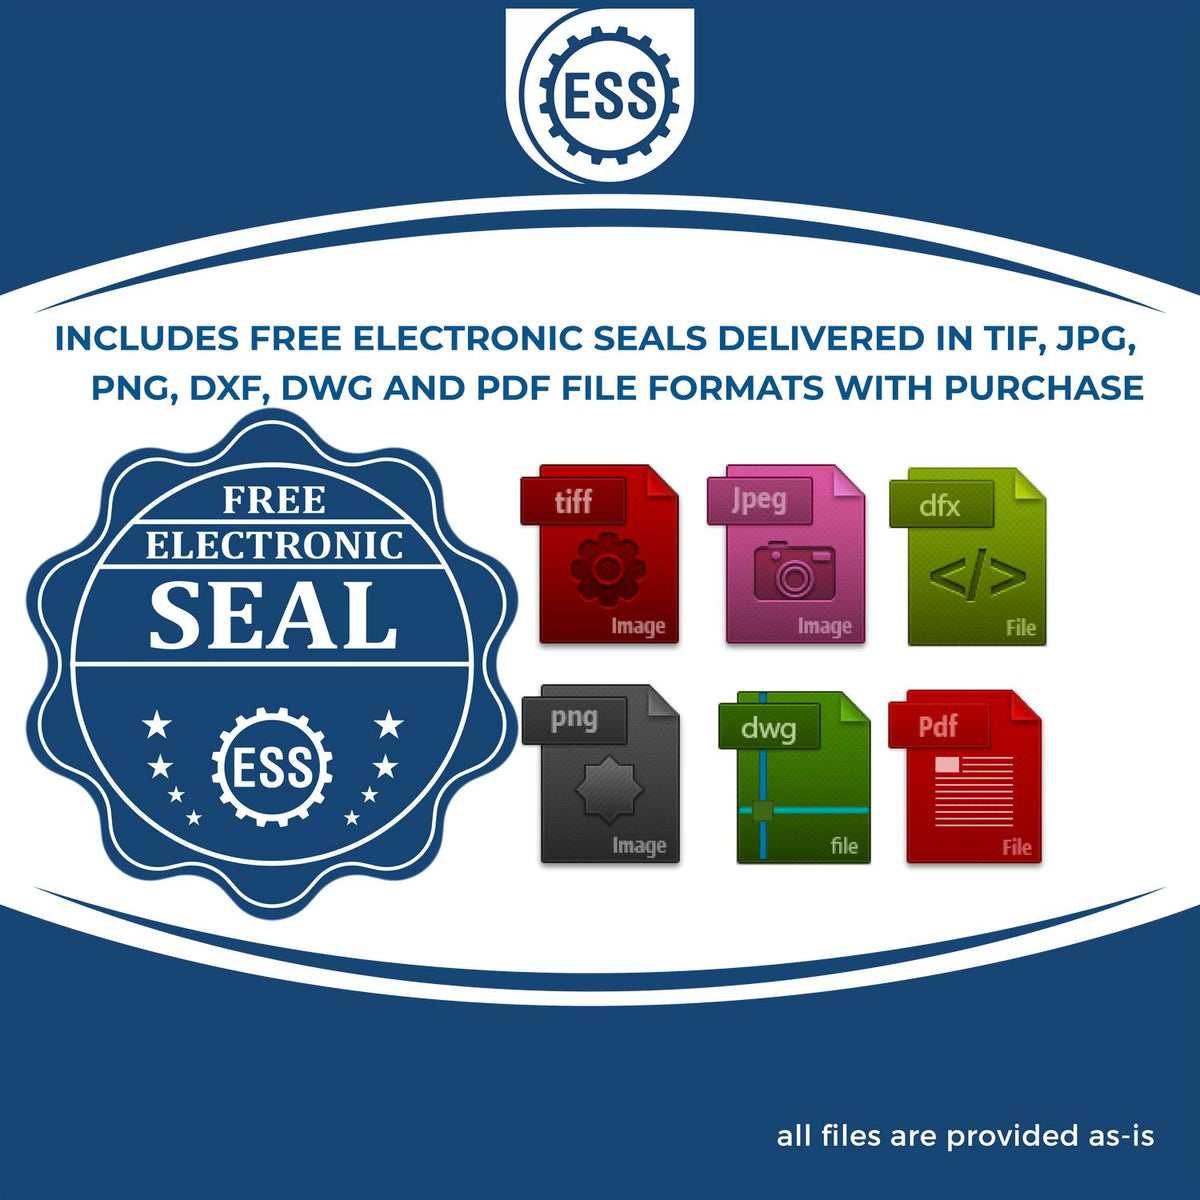 An infographic for the free electronic seal for the PSI Mississippi Notary Stamp illustrating the different file type icons such as DXF, DWG, TIF, JPG and PNG.